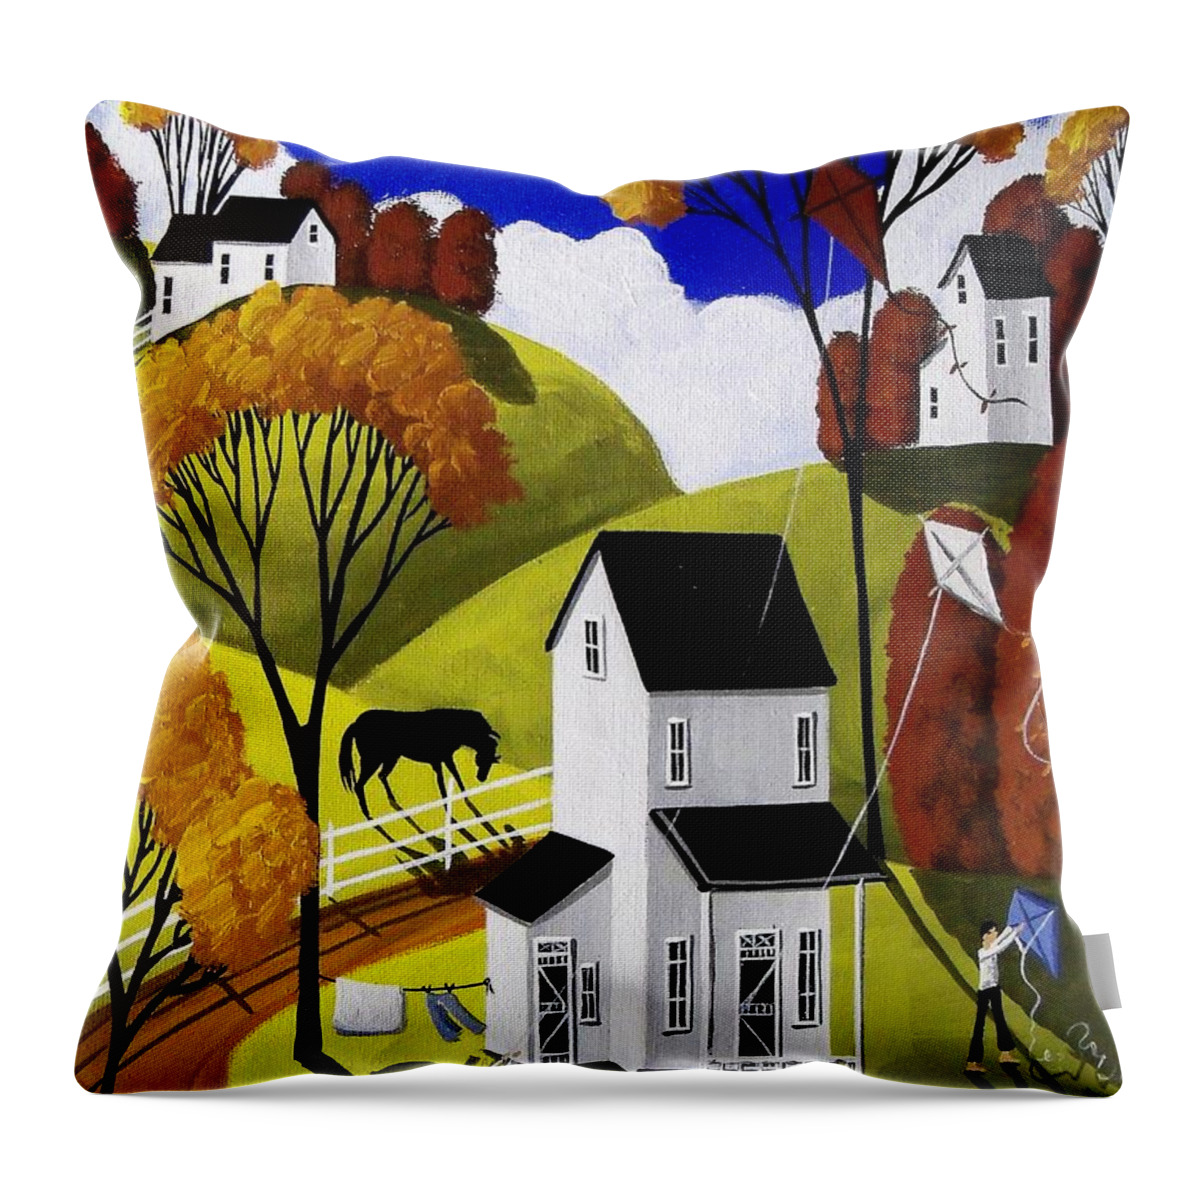 Folk Art Throw Pillow featuring the painting Fly My Kite With You by Debbie Criswell